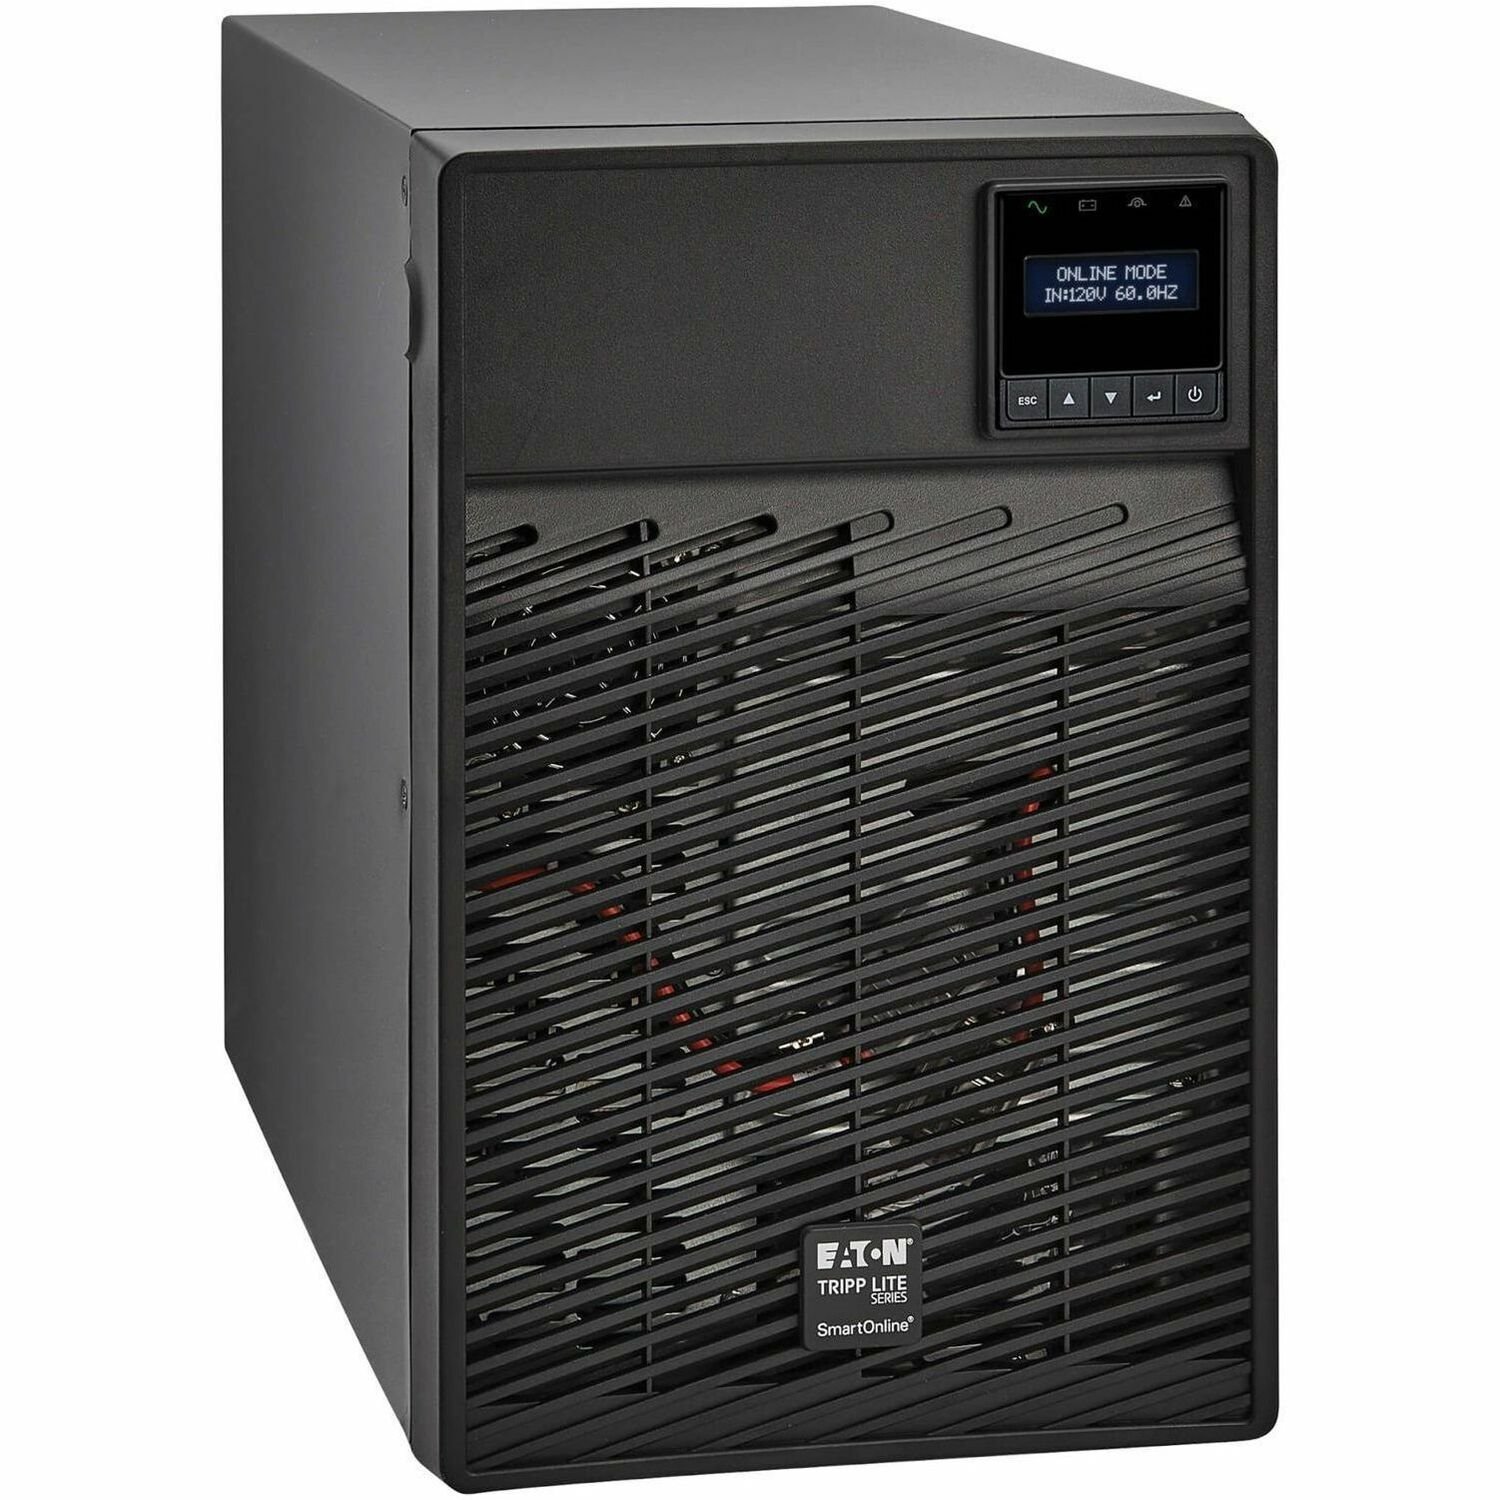 Eaton Tripp Lite Series SmartOnline 120V 700VA 630W Double-Conversion UPS, 6 Outlets, Network Card Option, LCD, USB, DB9, Tower